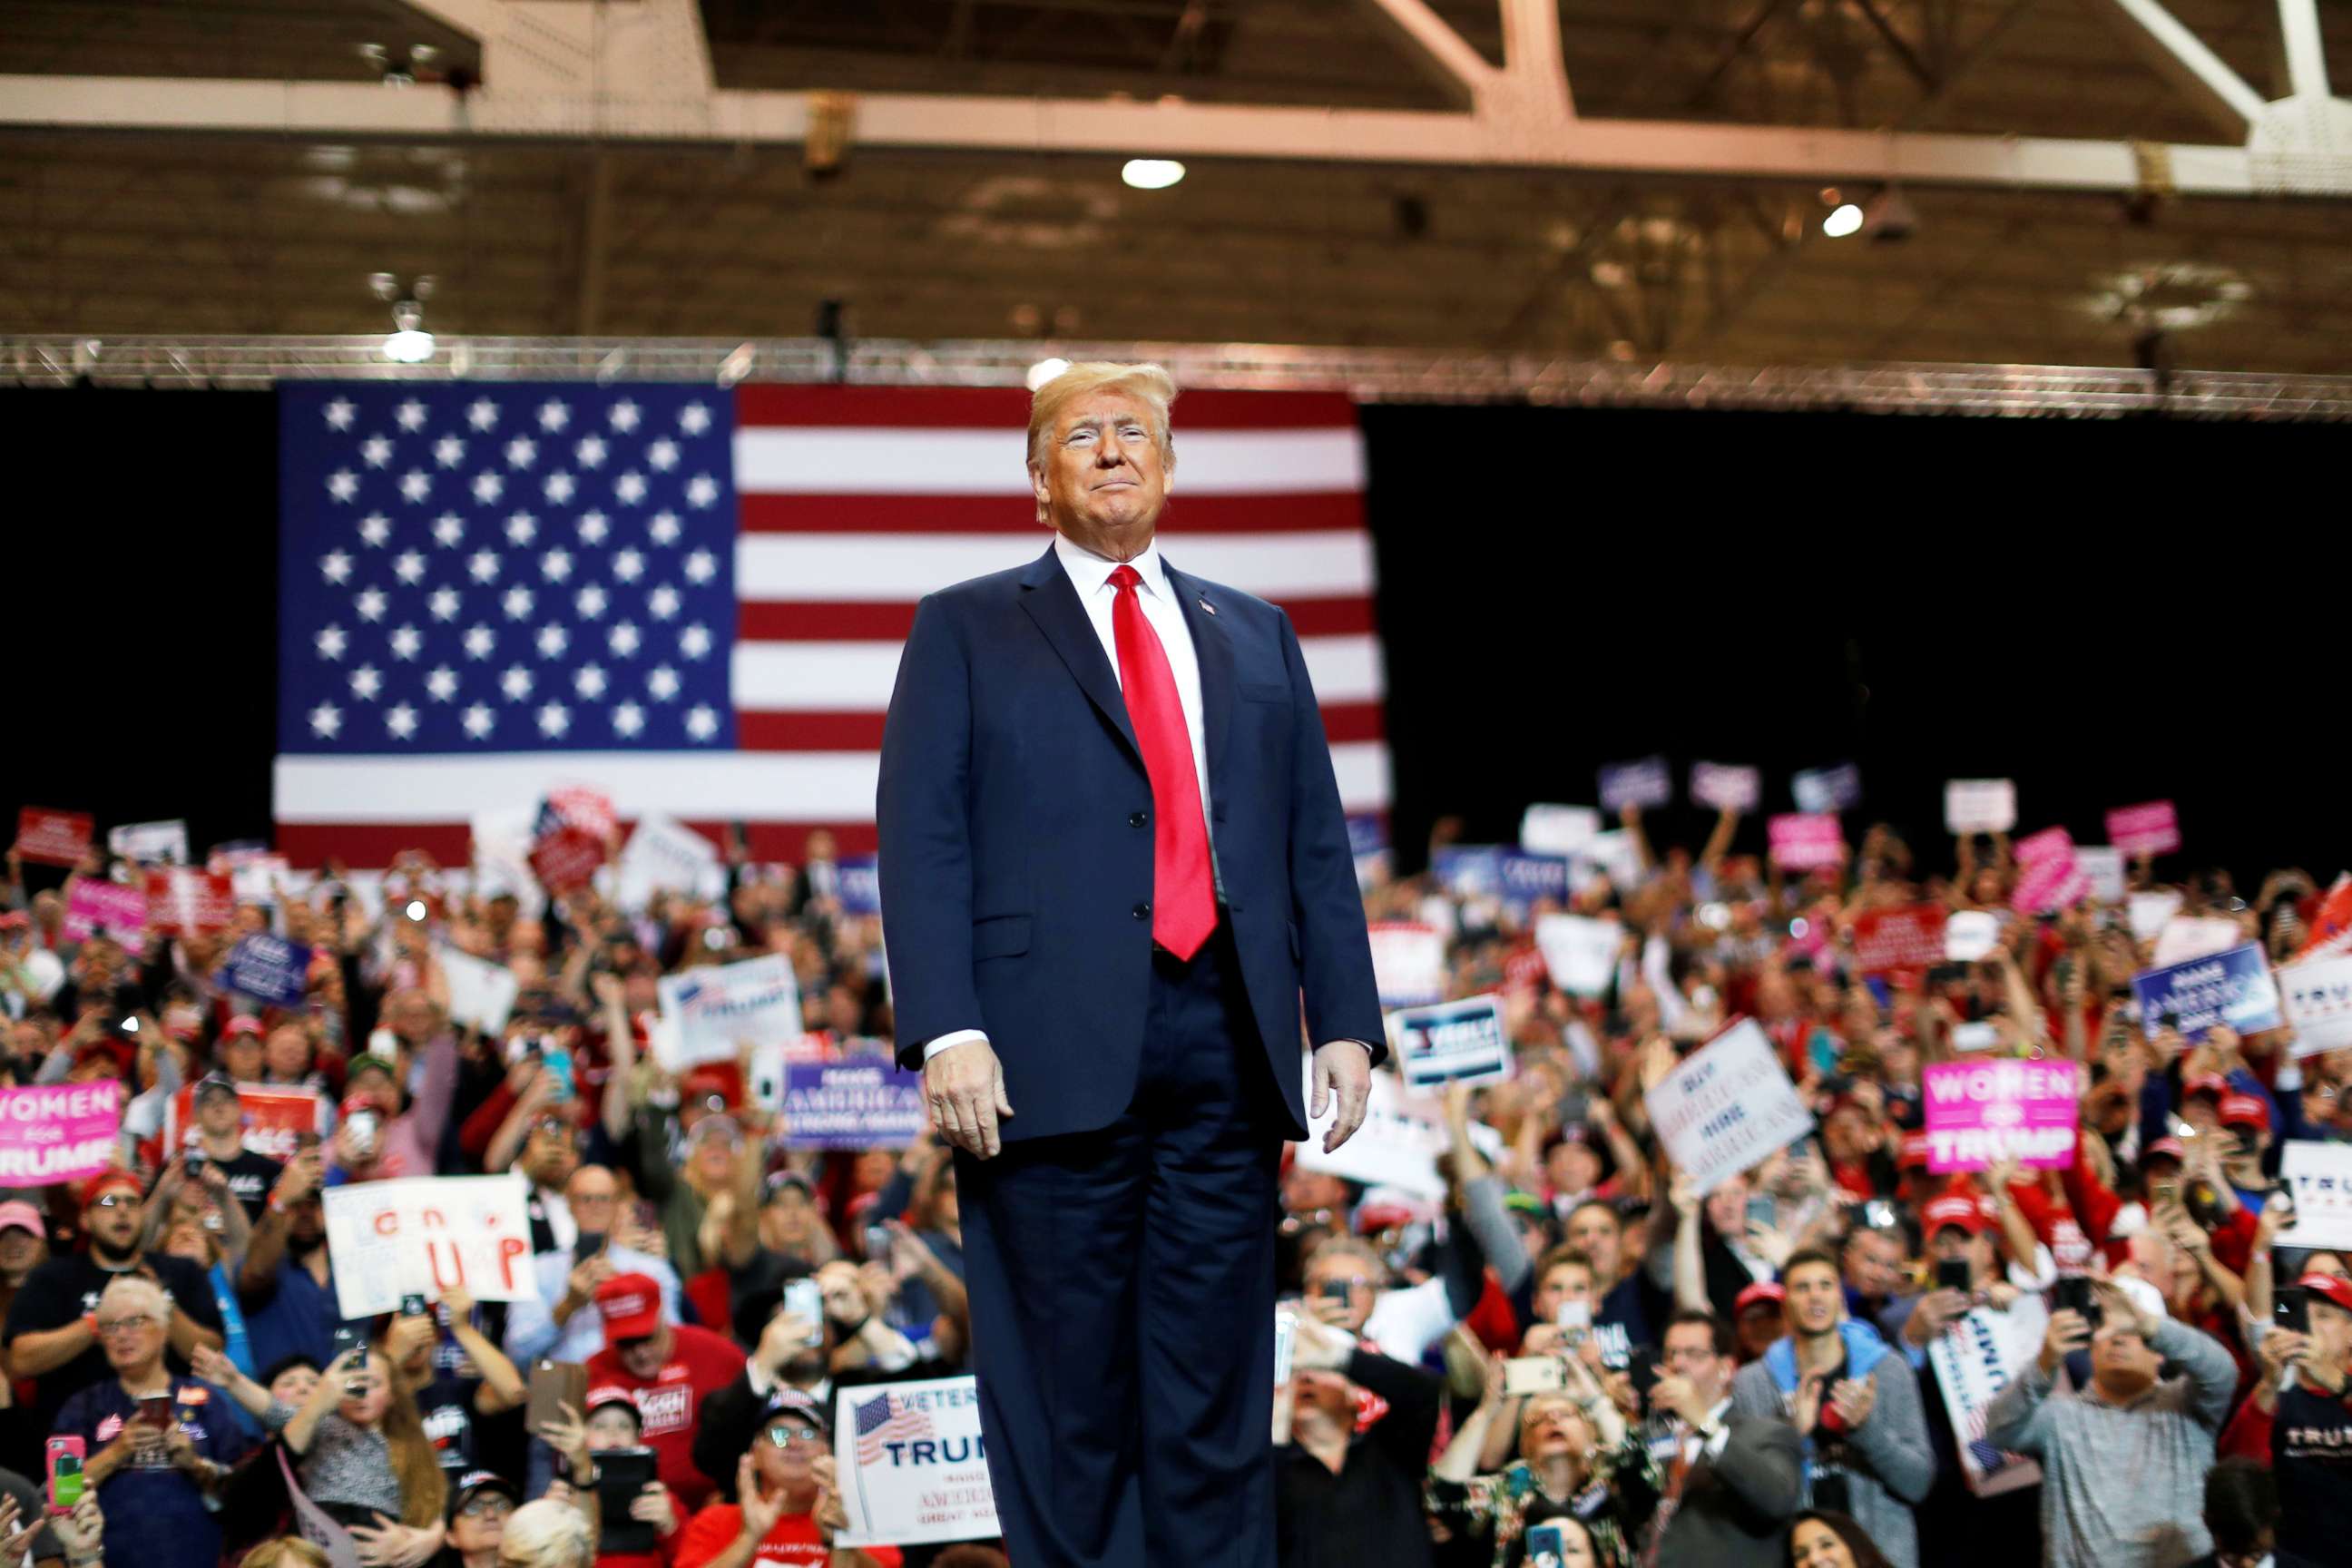 PHOTO: President Donald Trump acknowledges supporters during a campaign rally in Cleveland, Nov. 5, 2018.